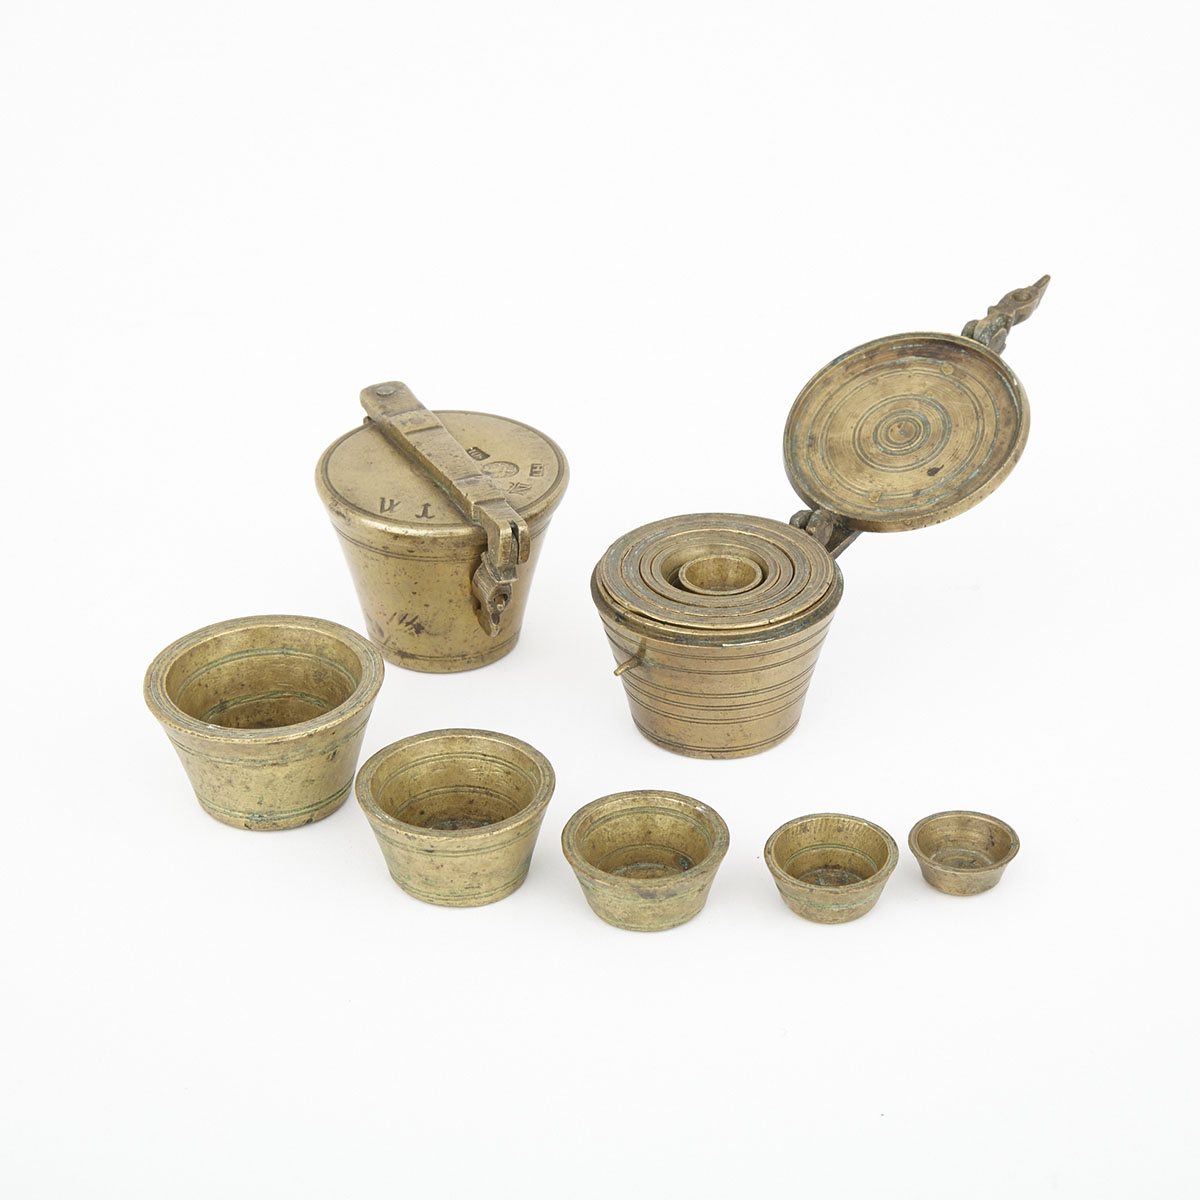 Two Sets of Nuremberg Bronze Nesting Weights, Germany, mid 18th century